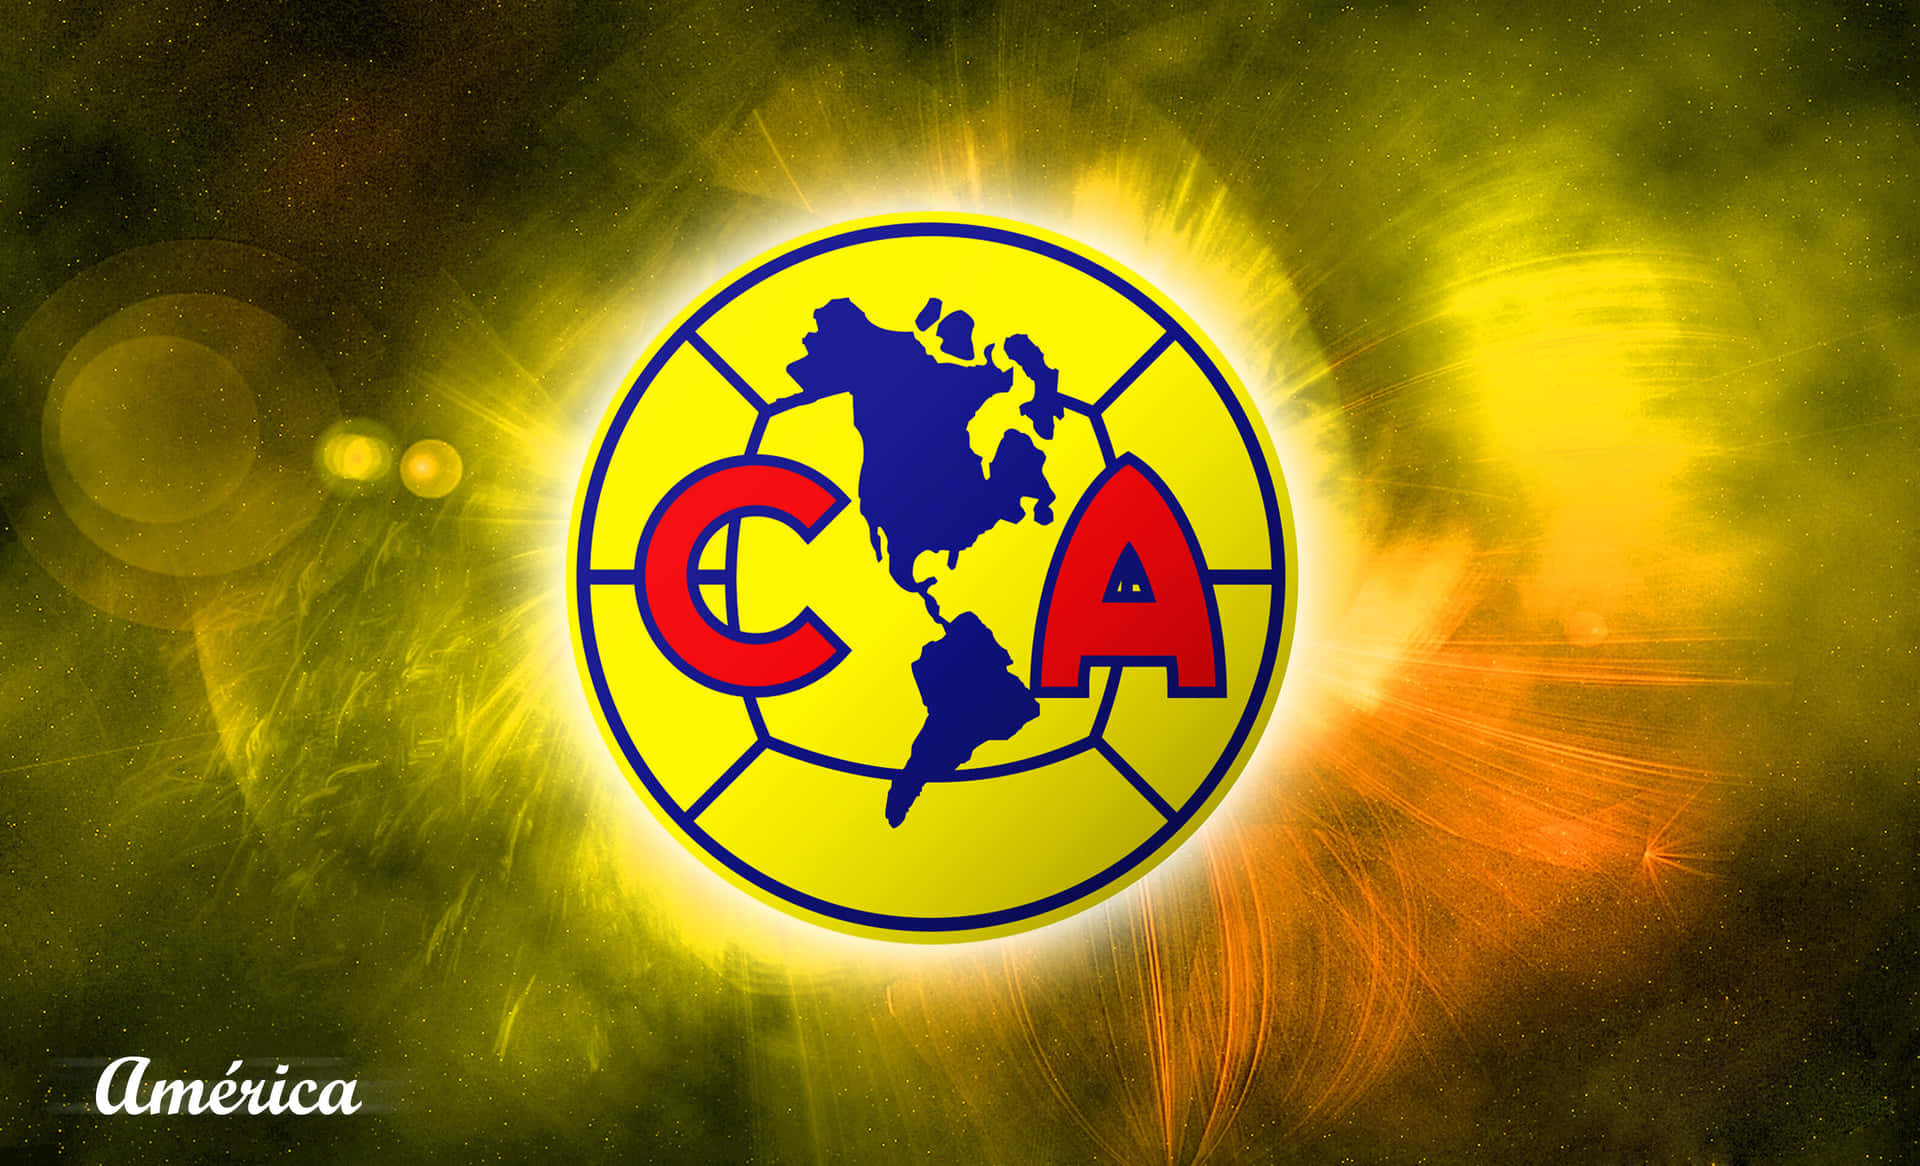 Representing the pride and honour of Mexico through Club America! Wallpaper